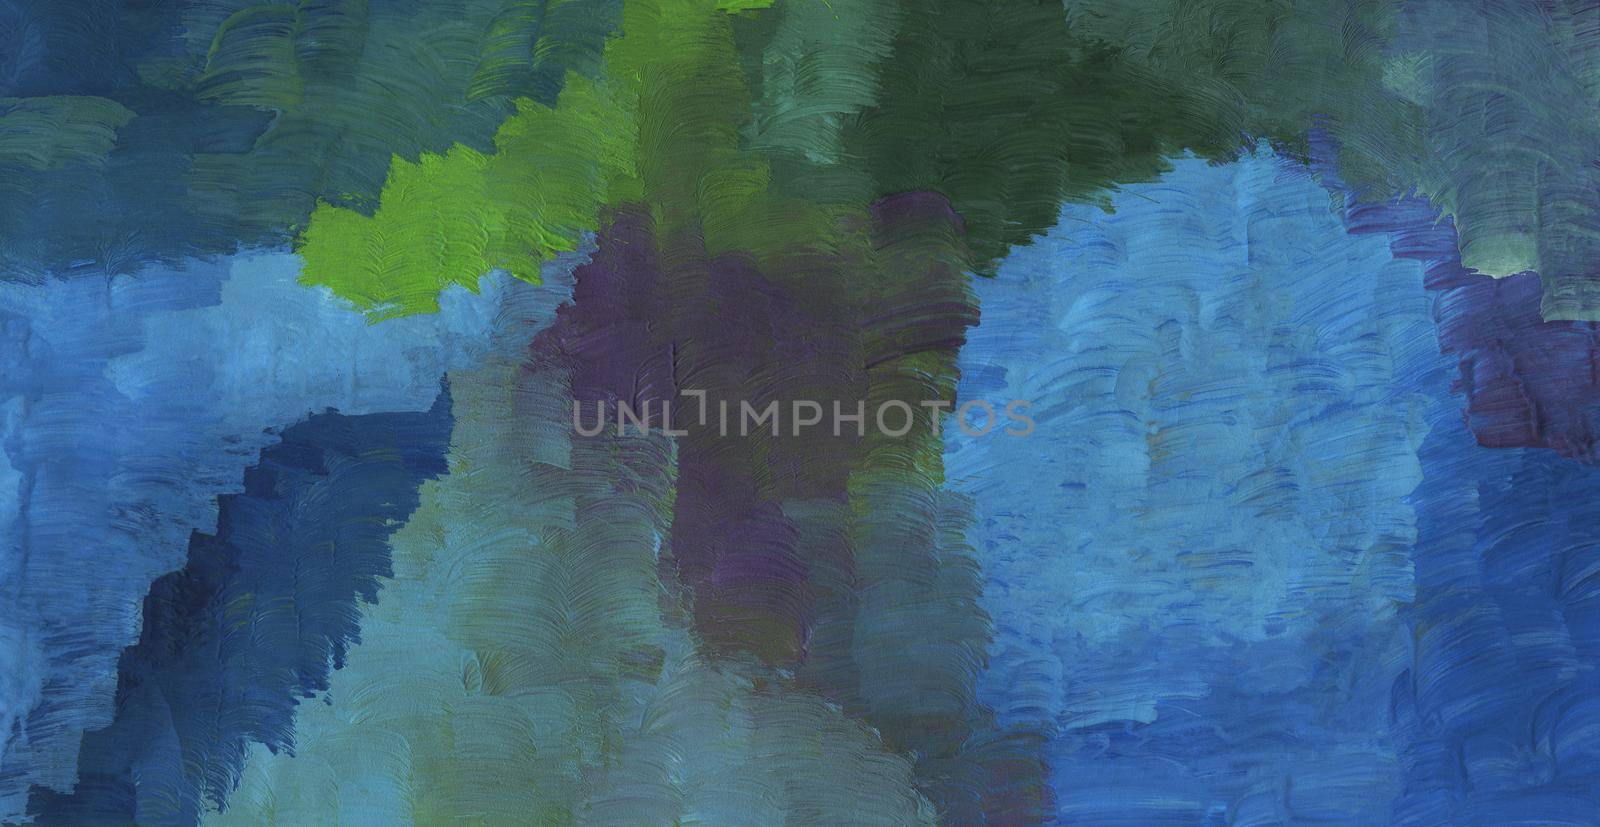 Colored Hand Drawn Gouache Abstract Background. Gouache Paint Decorative Texture Backdrop.